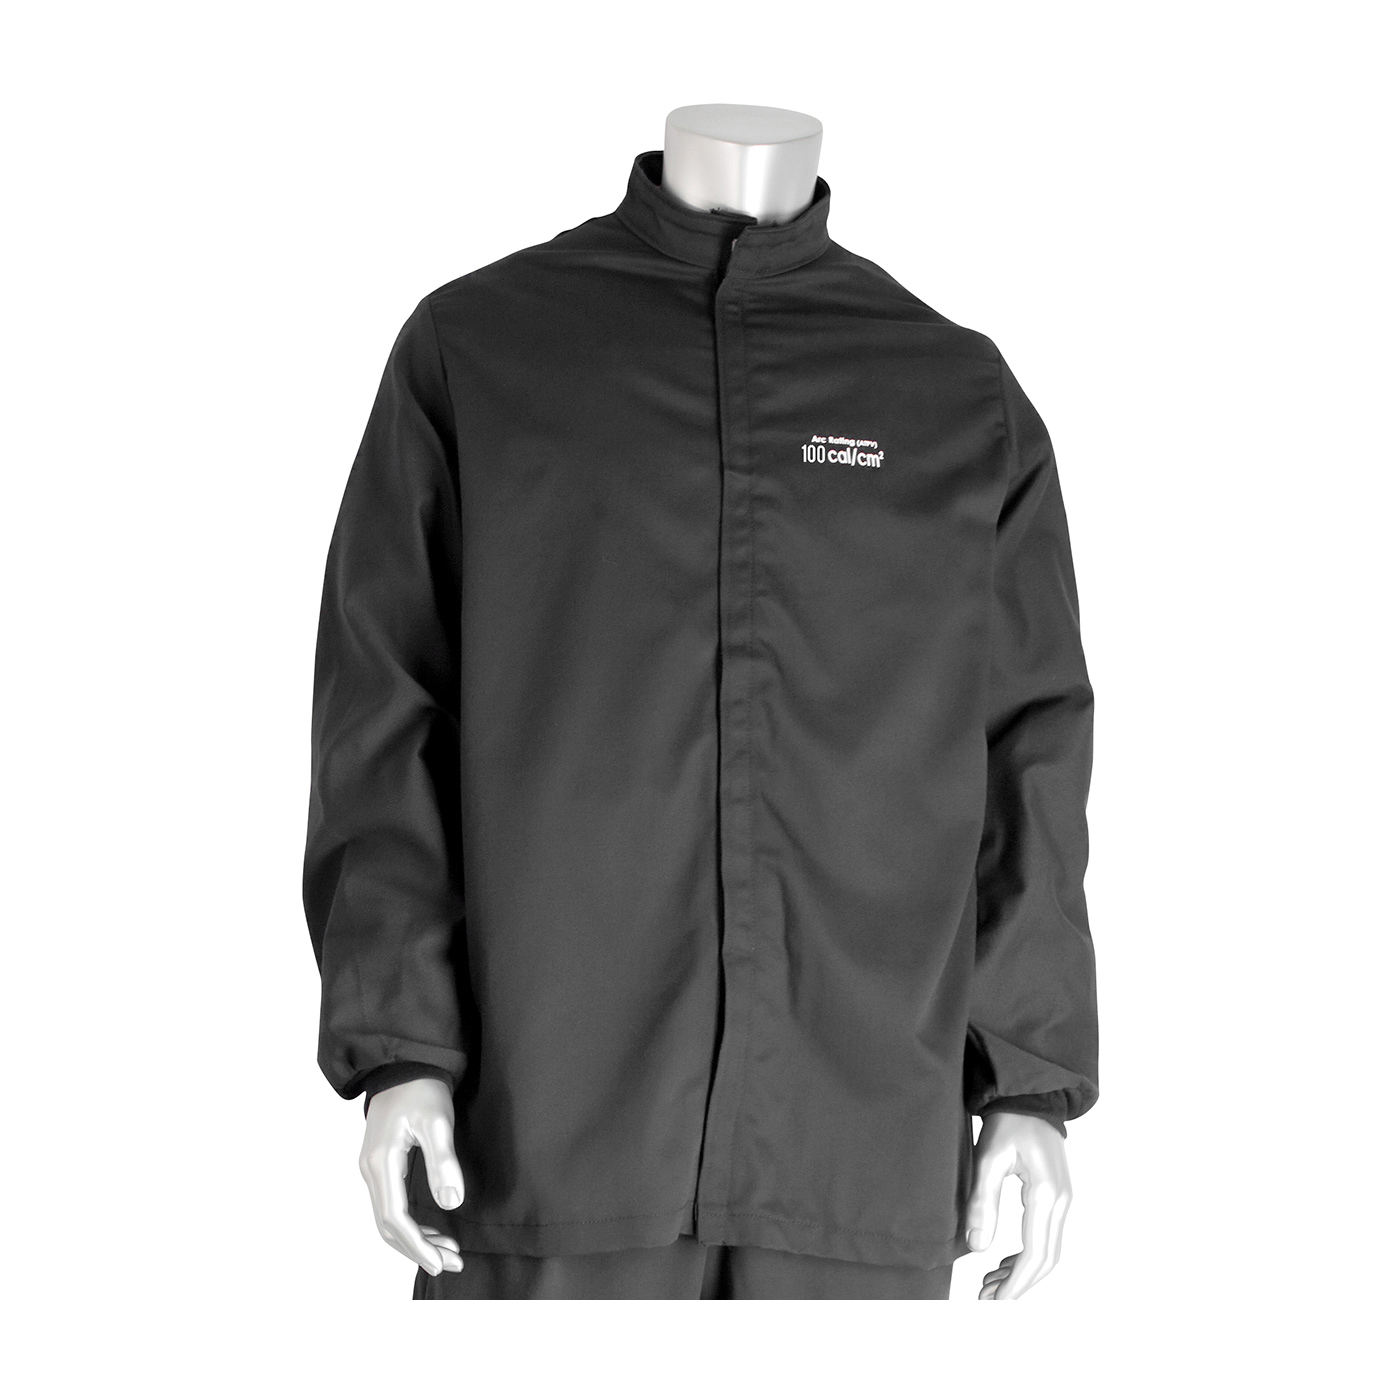 PIP® 9100-52750/M Arc and Flame Resistant Jacket, M, Gray, Aramid/Cotton, 40 to 42 in Chest, Resists: Arc and Flame, ASTM F1506-10a, ASTM F2178-12